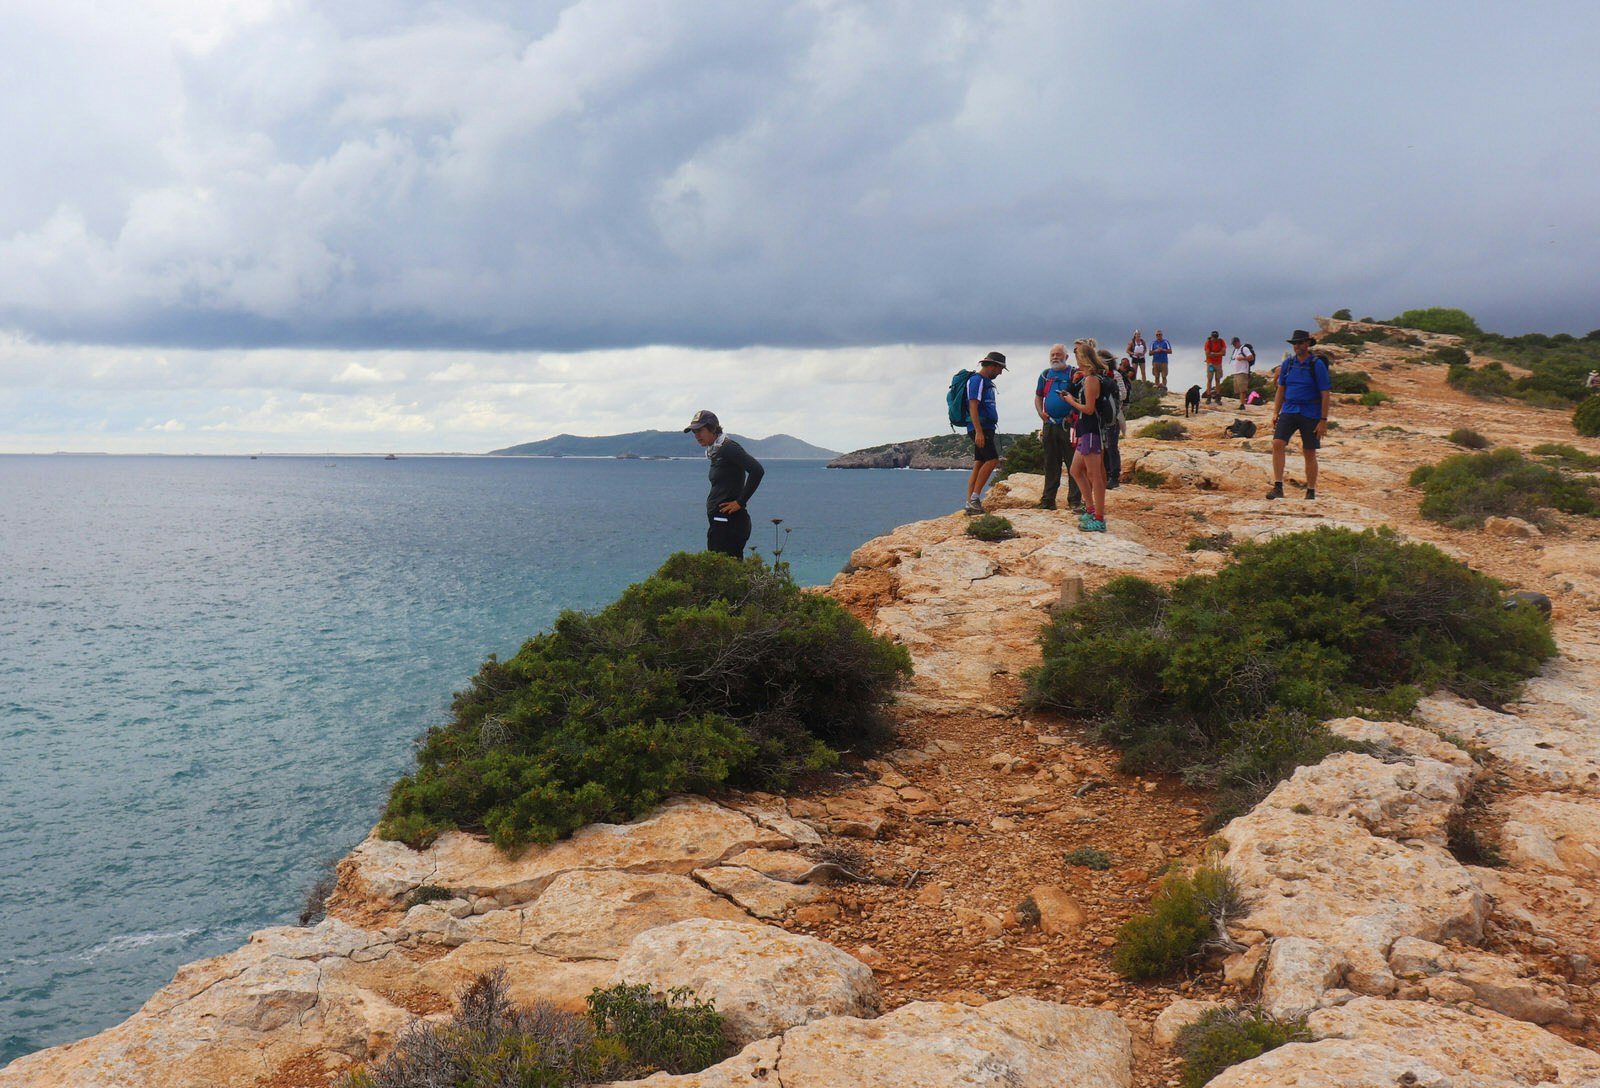 Ibiza spa breaks - a group of people walk along a cliff in Ibiza. The cliff has warm dusty orange rocks with hardy bushes and overlooks the sea and a cloudy sky